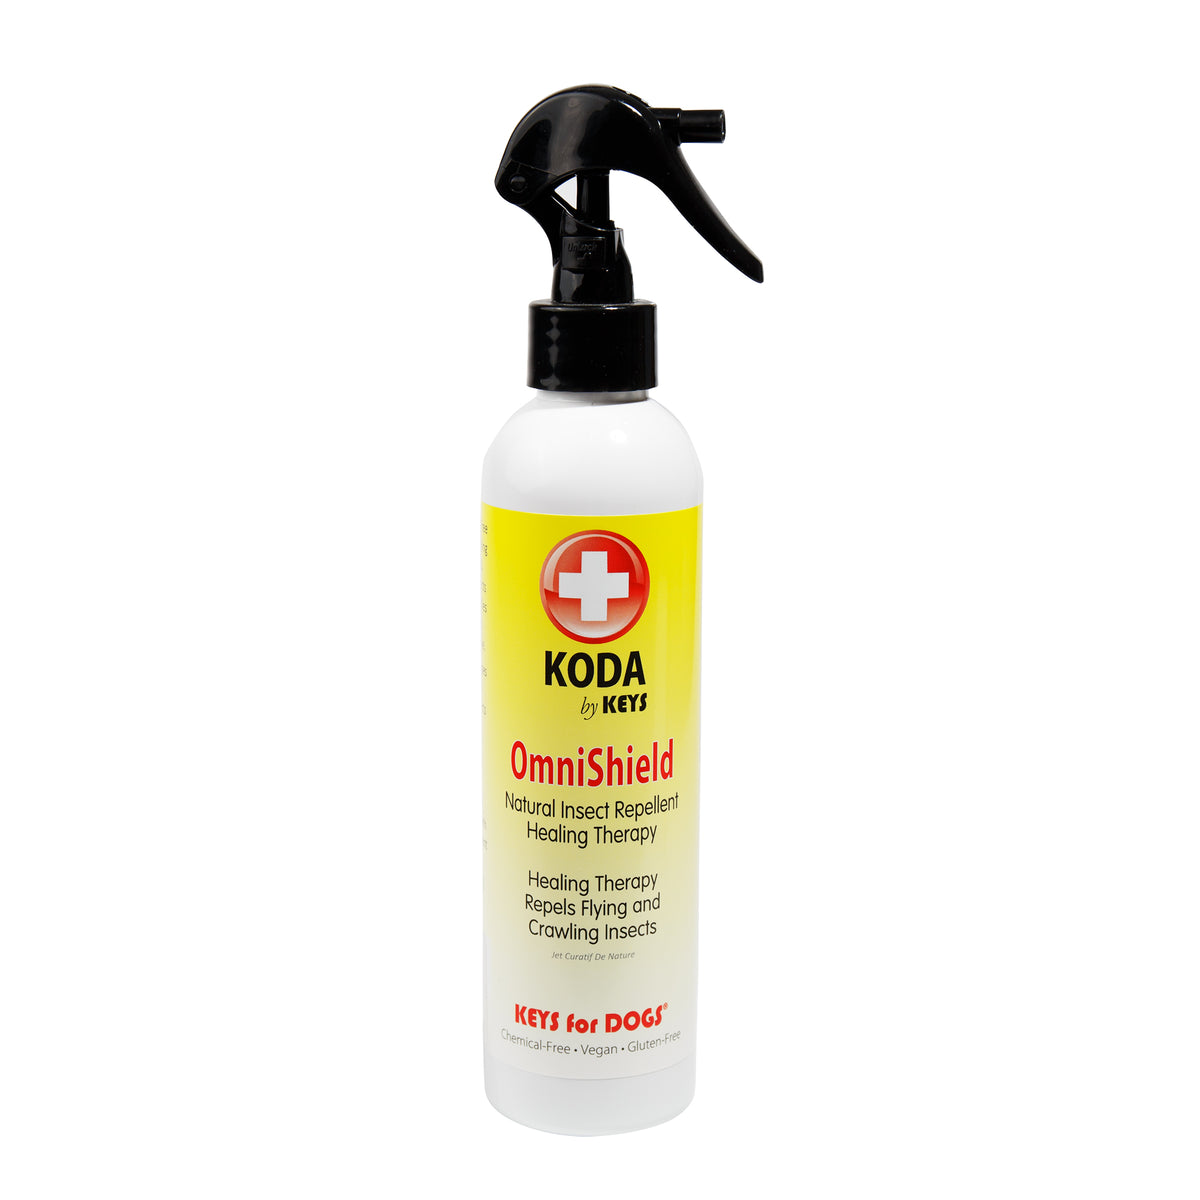 Primary image of Koda OmniShield - Insect Repellent for Dogs